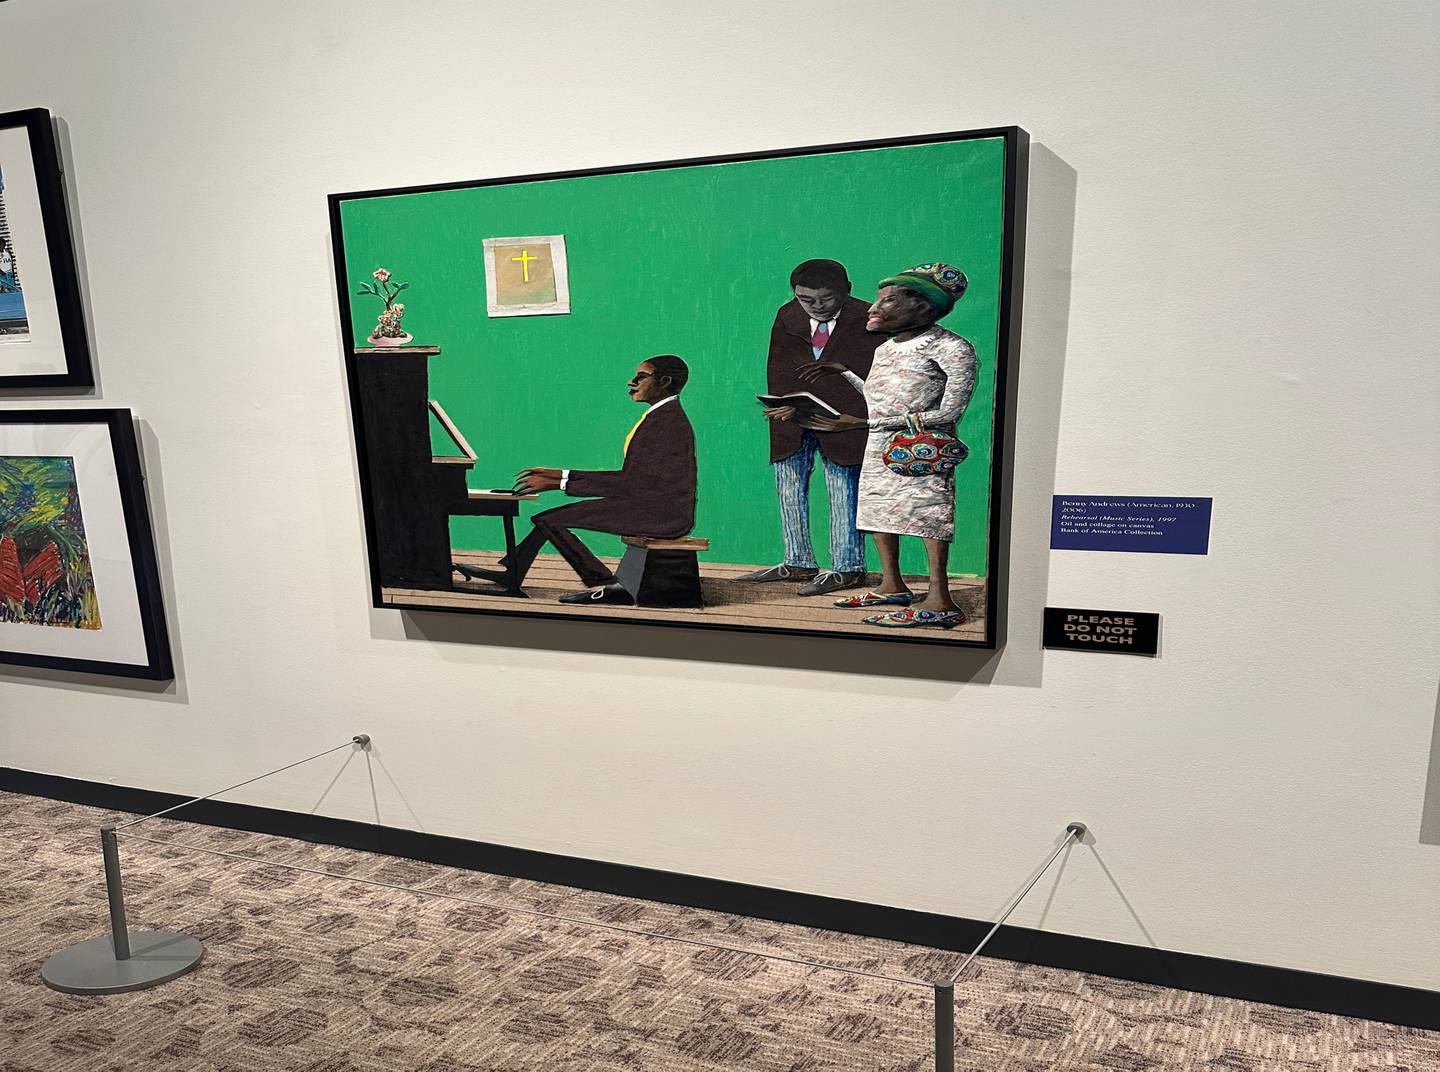 The Vision and Spirit collection, now at the Reginald F. Lewis Museum, uplifts and shares the Black experience through art, Janet Currie, greater Maryland president of Bank of America, says.  Benny Andrews (American, 1930-2006); Rehearsal (Music Series), 1997; Oil and collage on canvas; Bank of America Collection